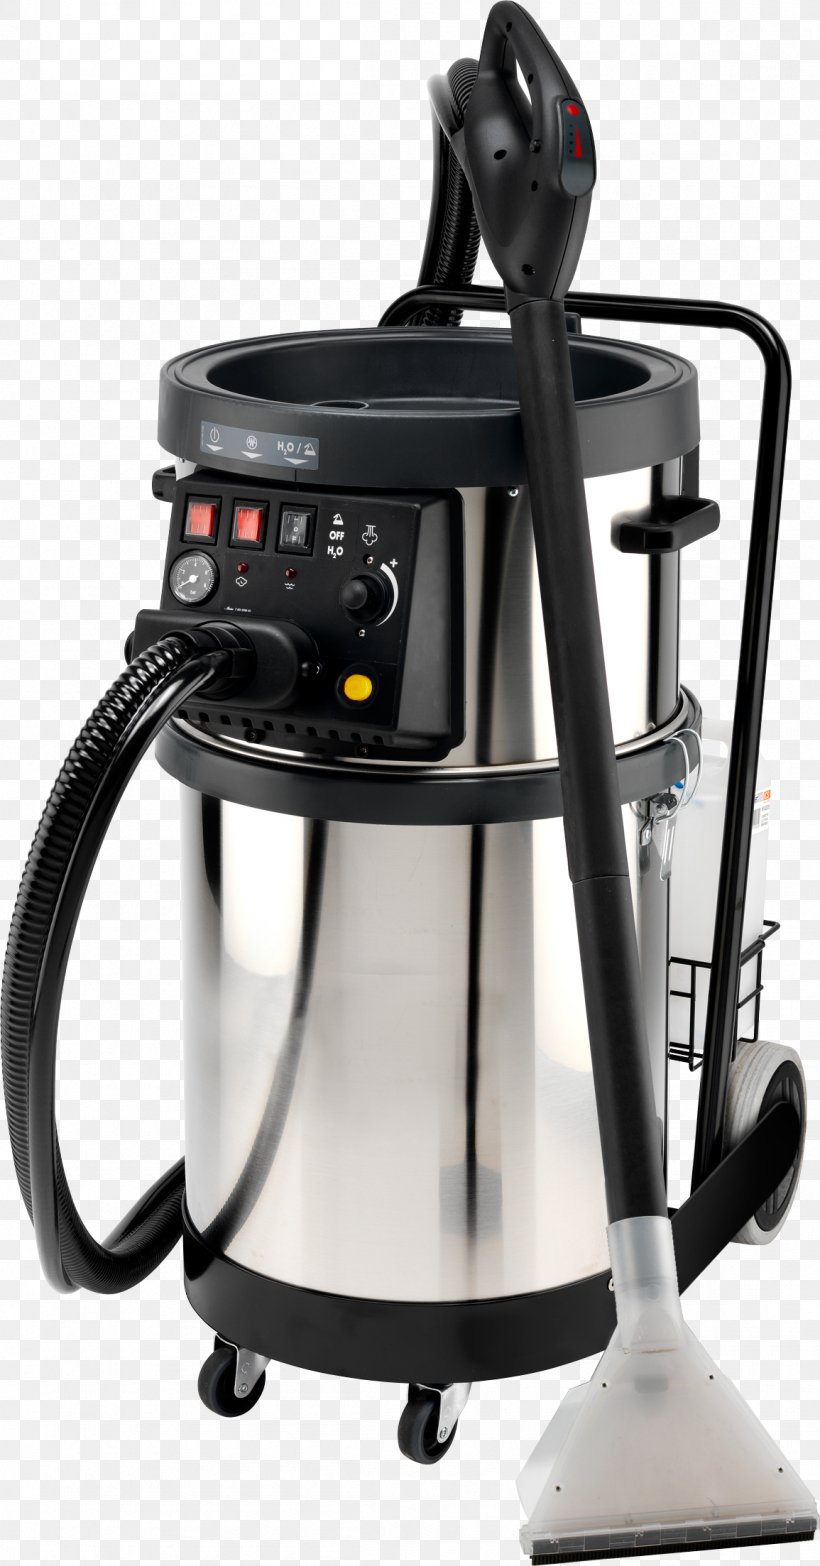 Vapor Steam Cleaner Vacuum Cleaner Steam Cleaning, PNG, 1155x2206px, Vapor Steam Cleaner, Boiler, Carpet Cleaning, Cleaner, Cleaning Download Free